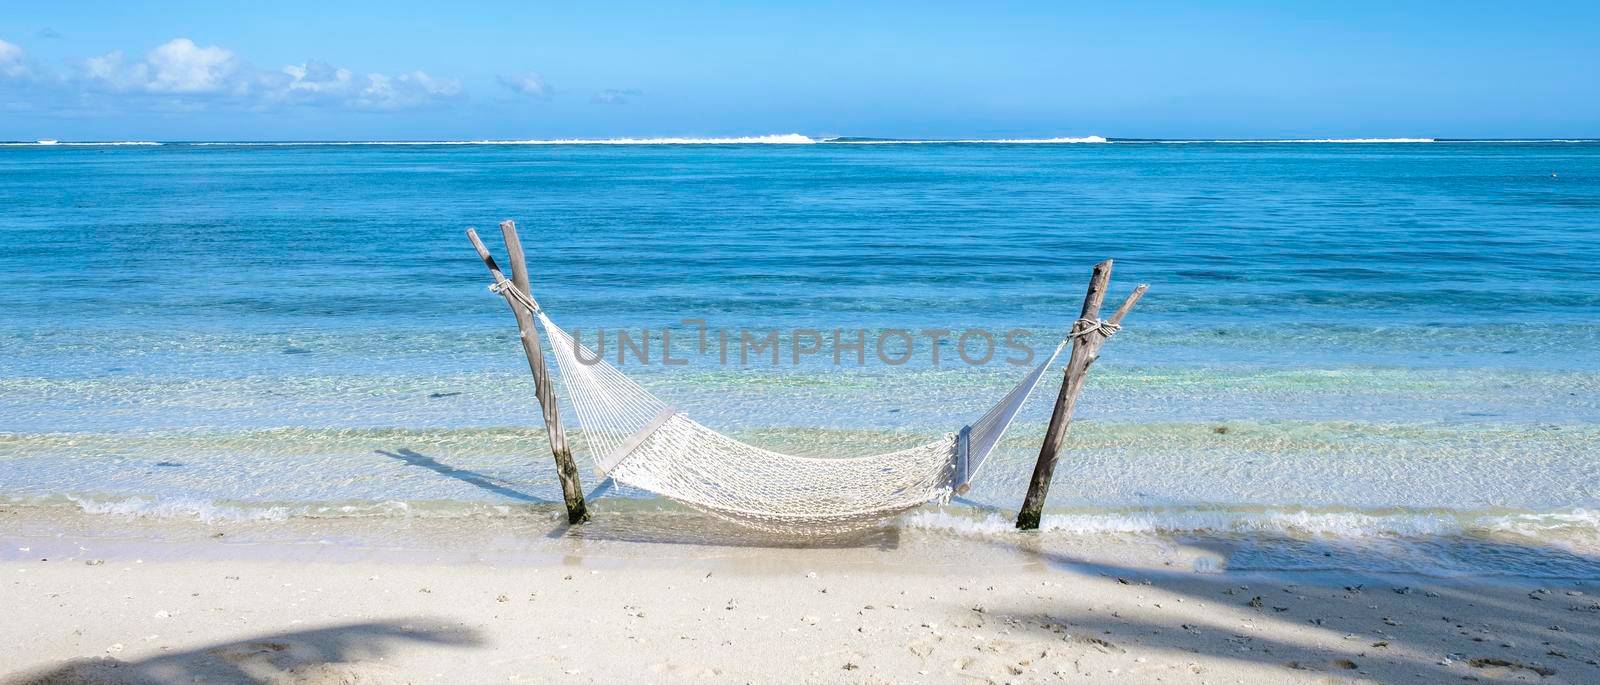 tropical beach with hammock in the ocean, white sandy beach with hammock Le Morne beach Mauritius.